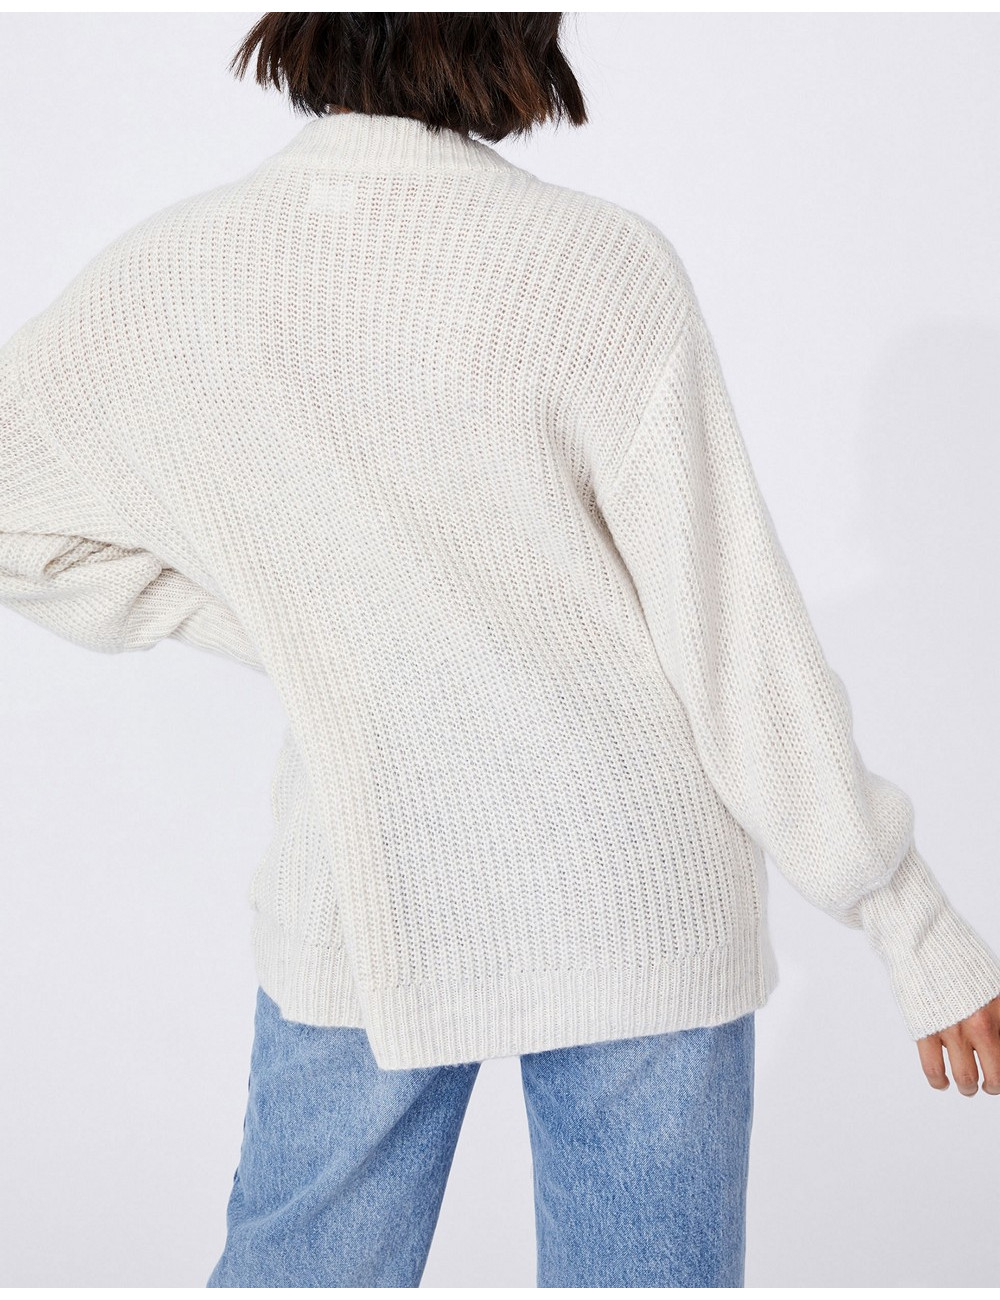 Cotton:On dad cardigan in...